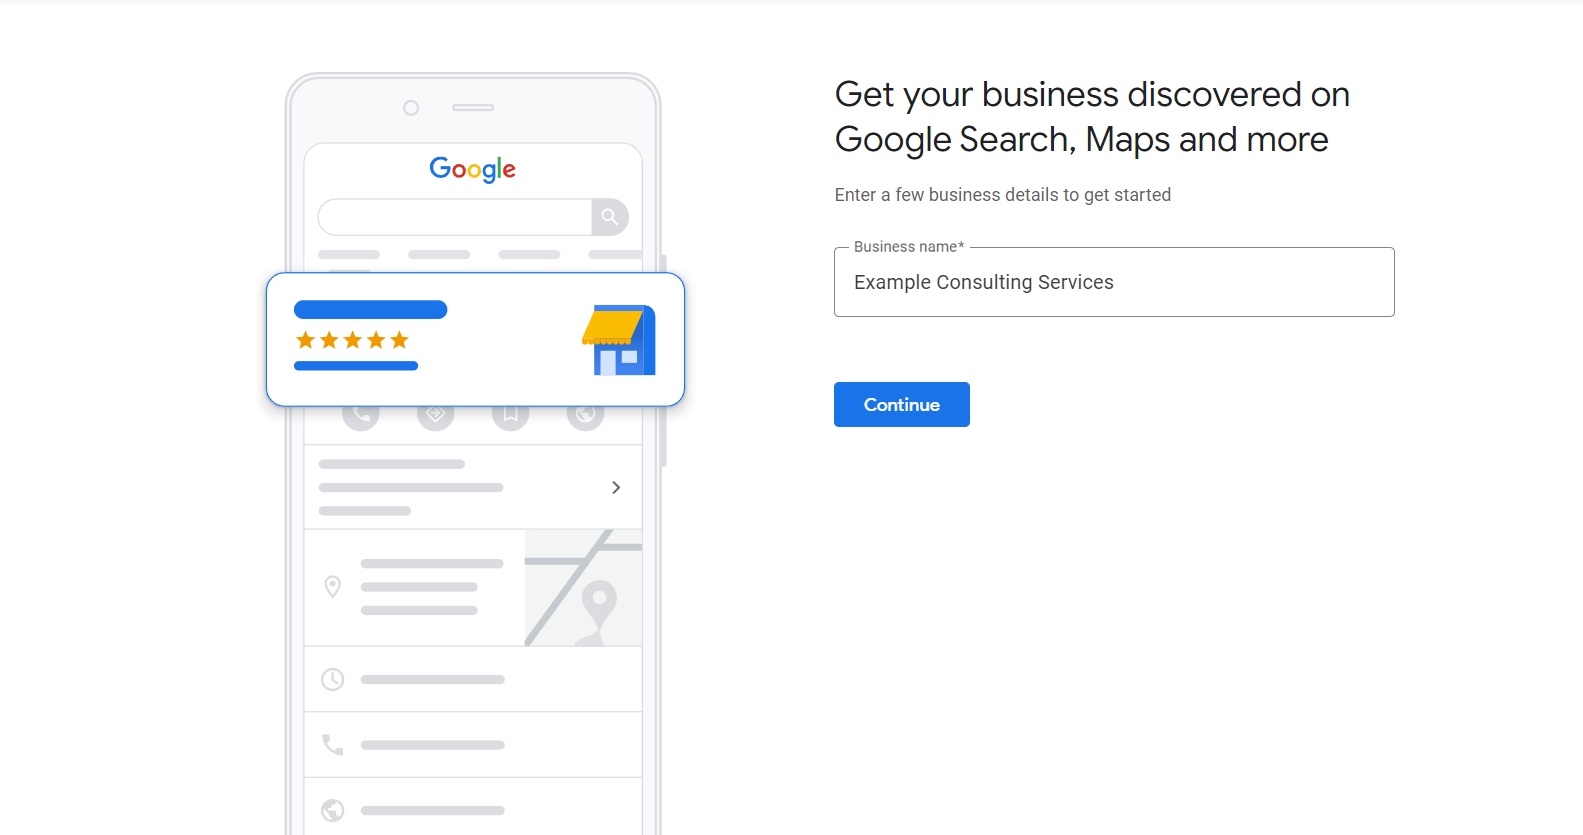 Add your business name when creating your Google business profile